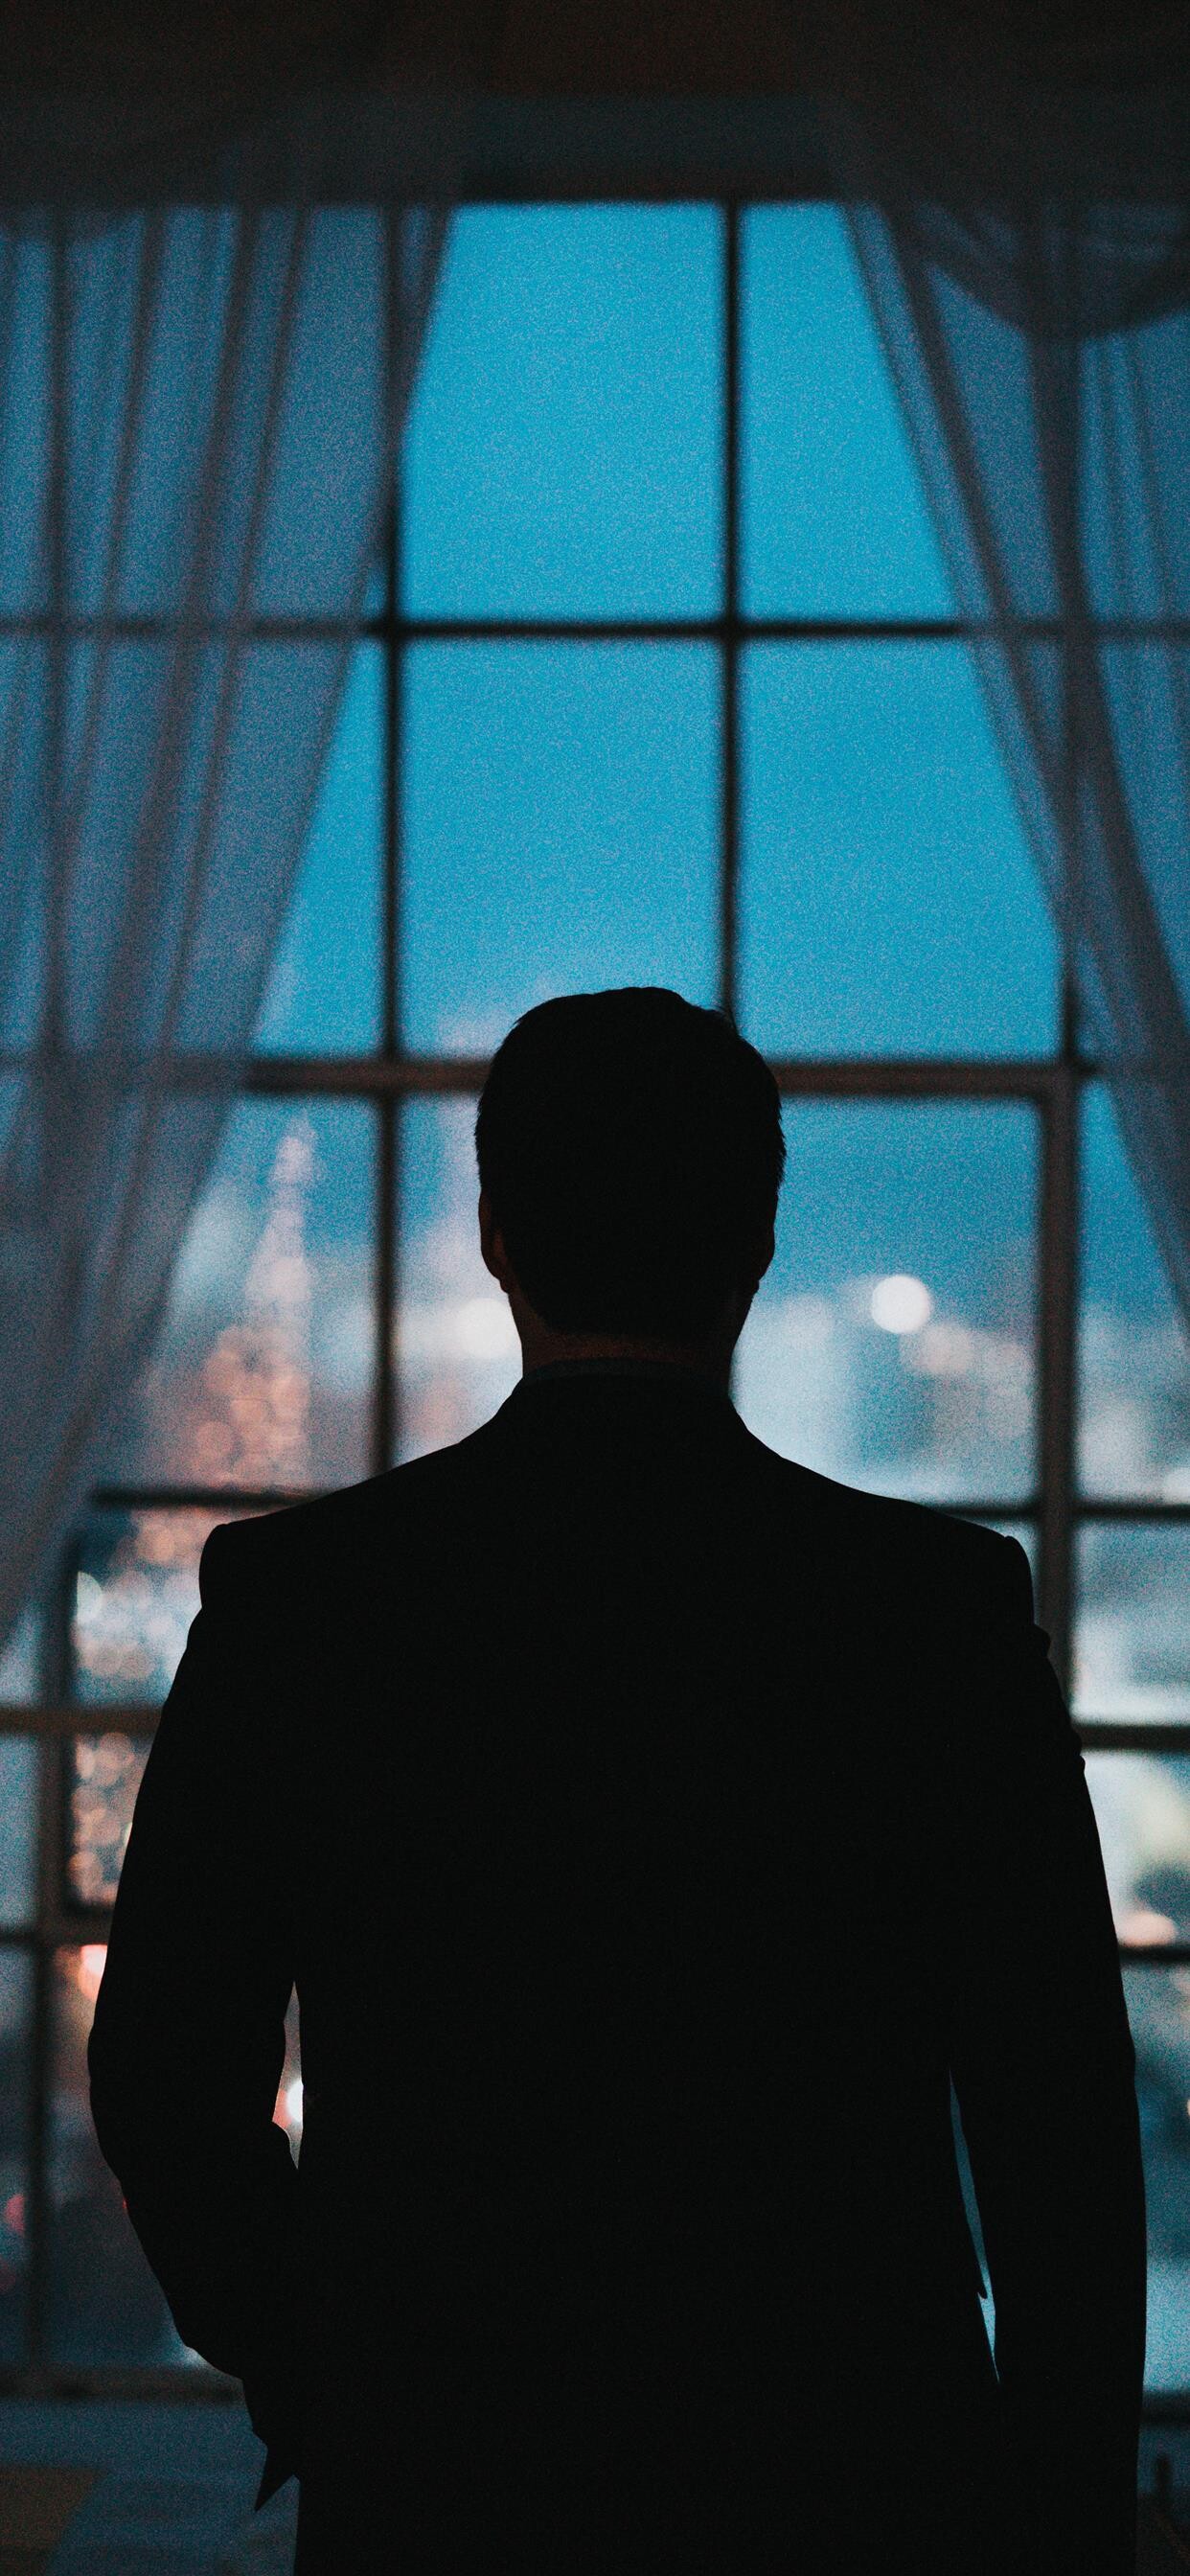 Gentleman: A person standing in front of window, Night city scenery, Silhouette. 1250x2690 HD Background.